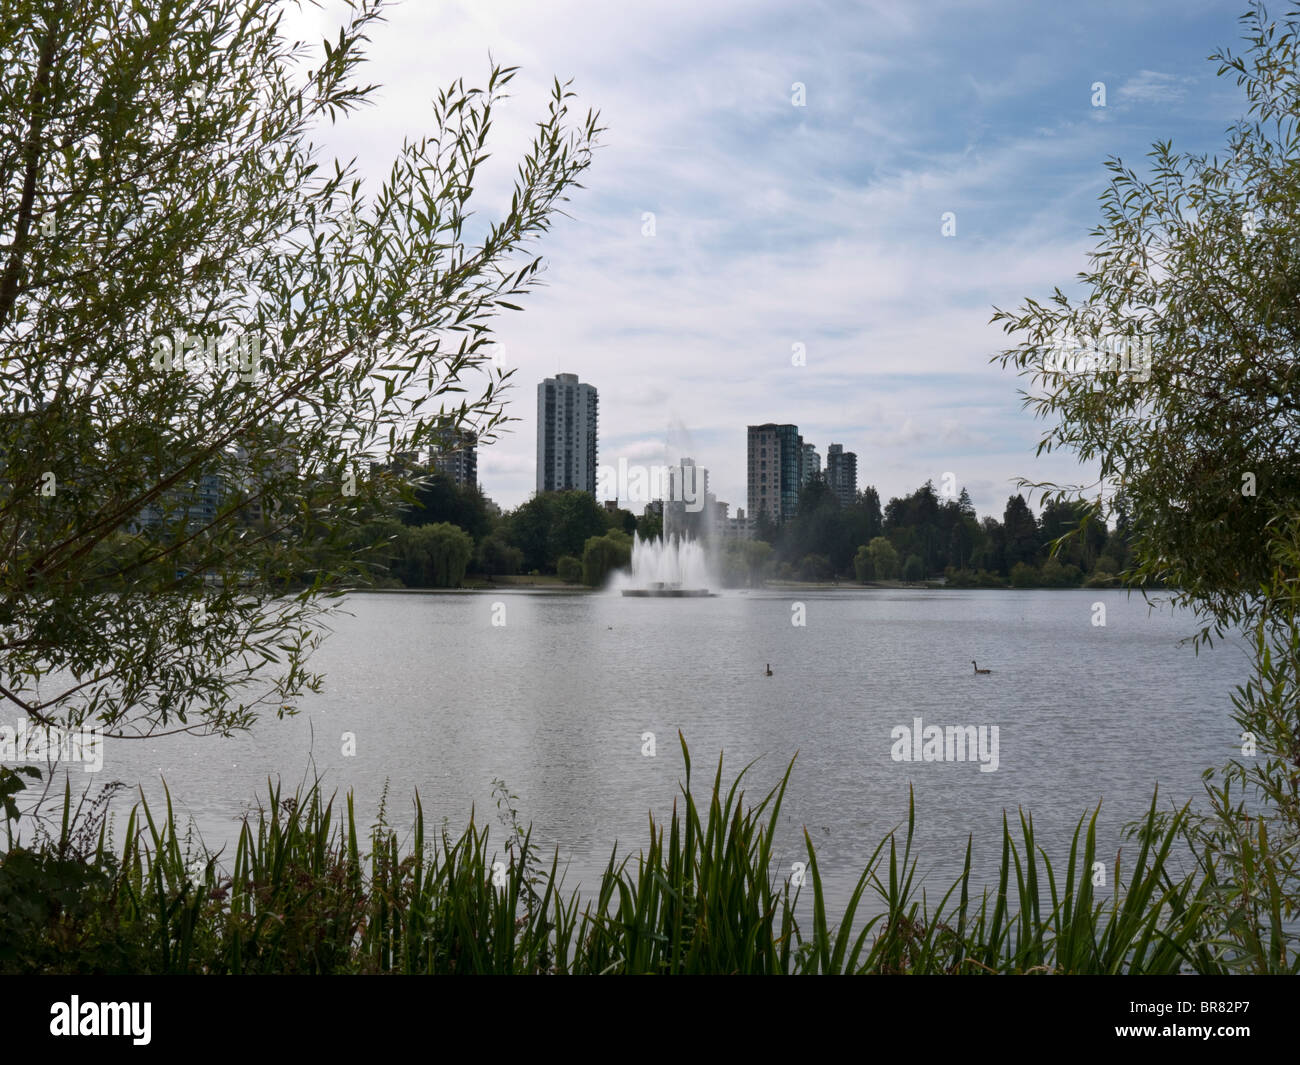 Vancouver across Lost Lagoon in Stanley Park, Vancouver, Canada September 2010 Stock Photo